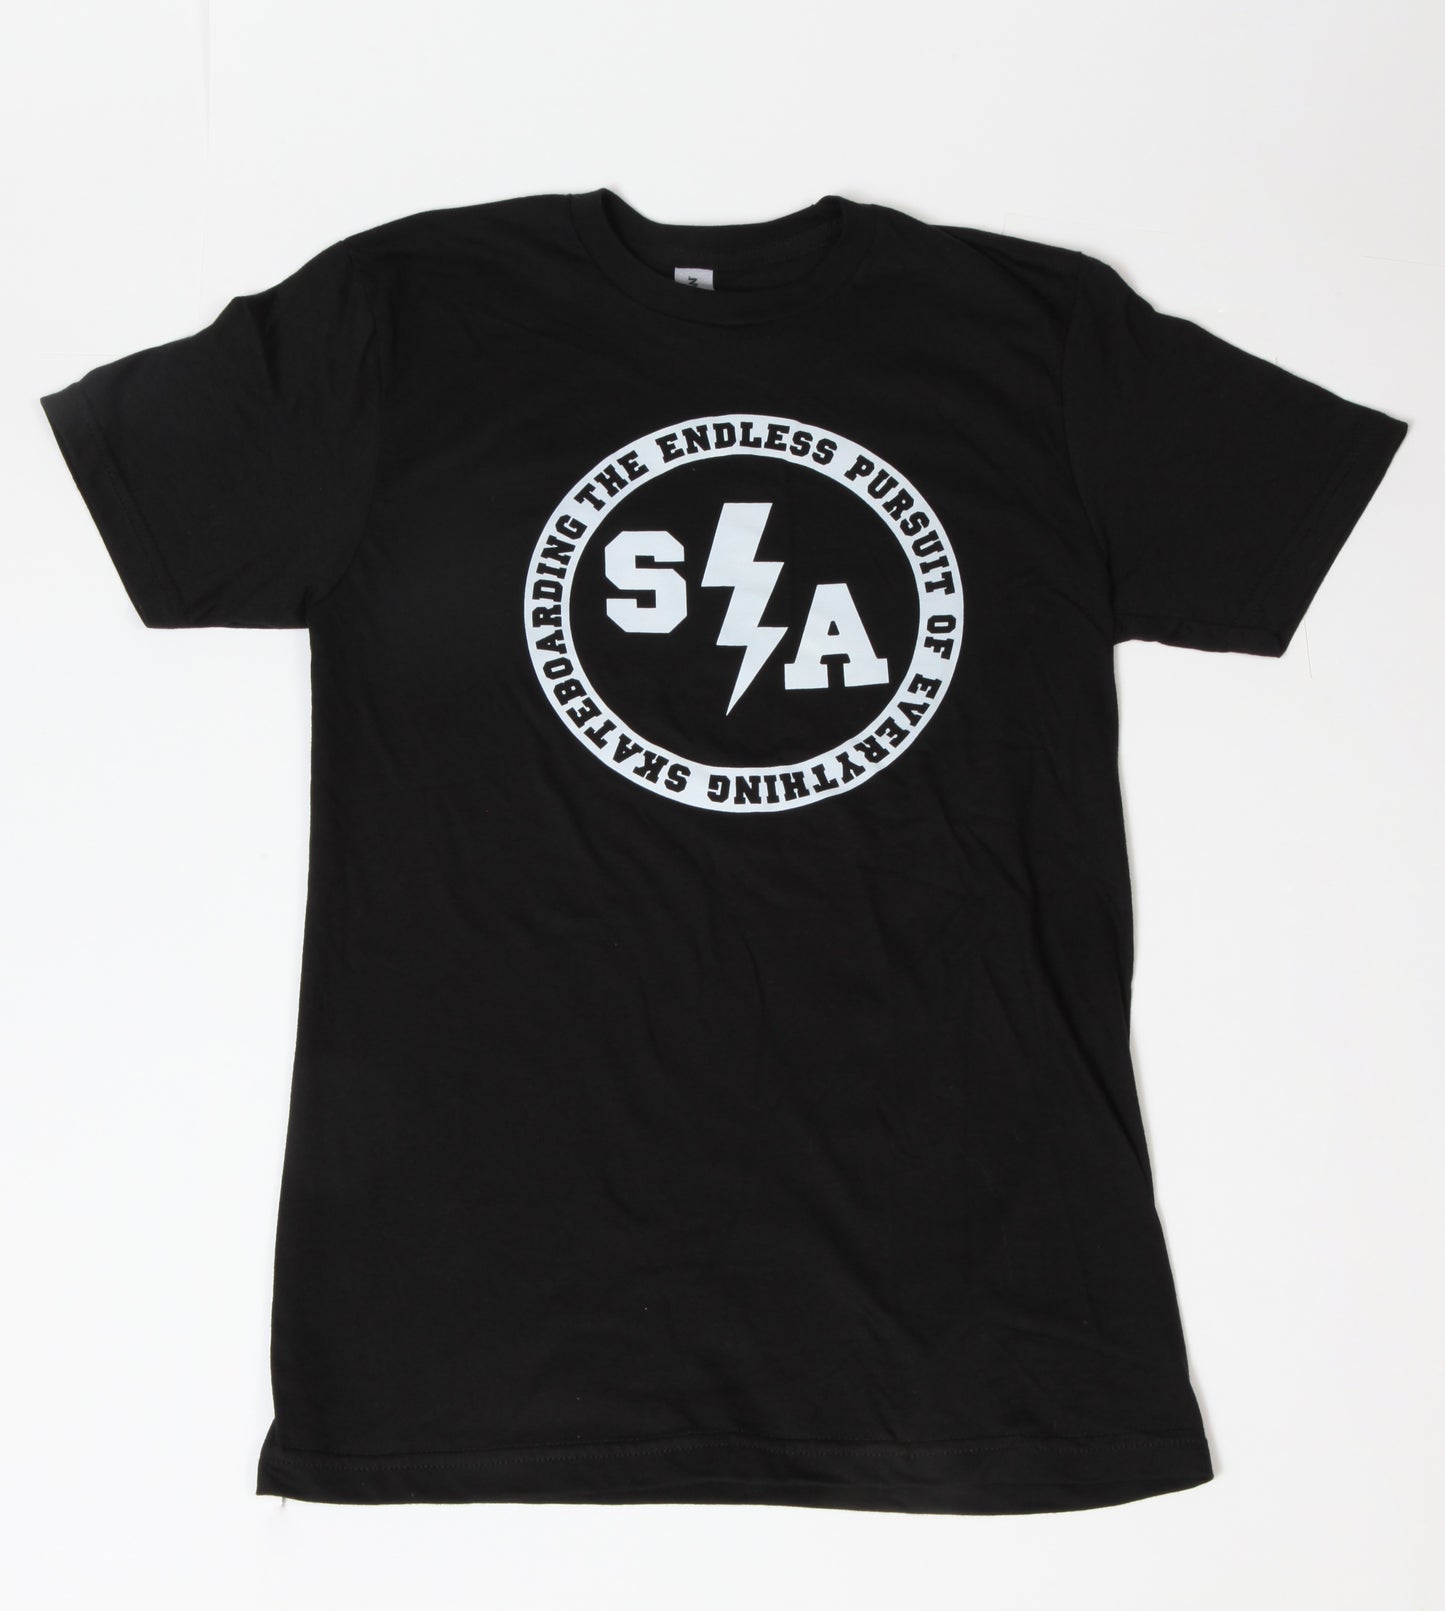 Youth Skaters Advocate Endless Pursuit / Consolidated Support Your Local Skateshop Tee Shirt